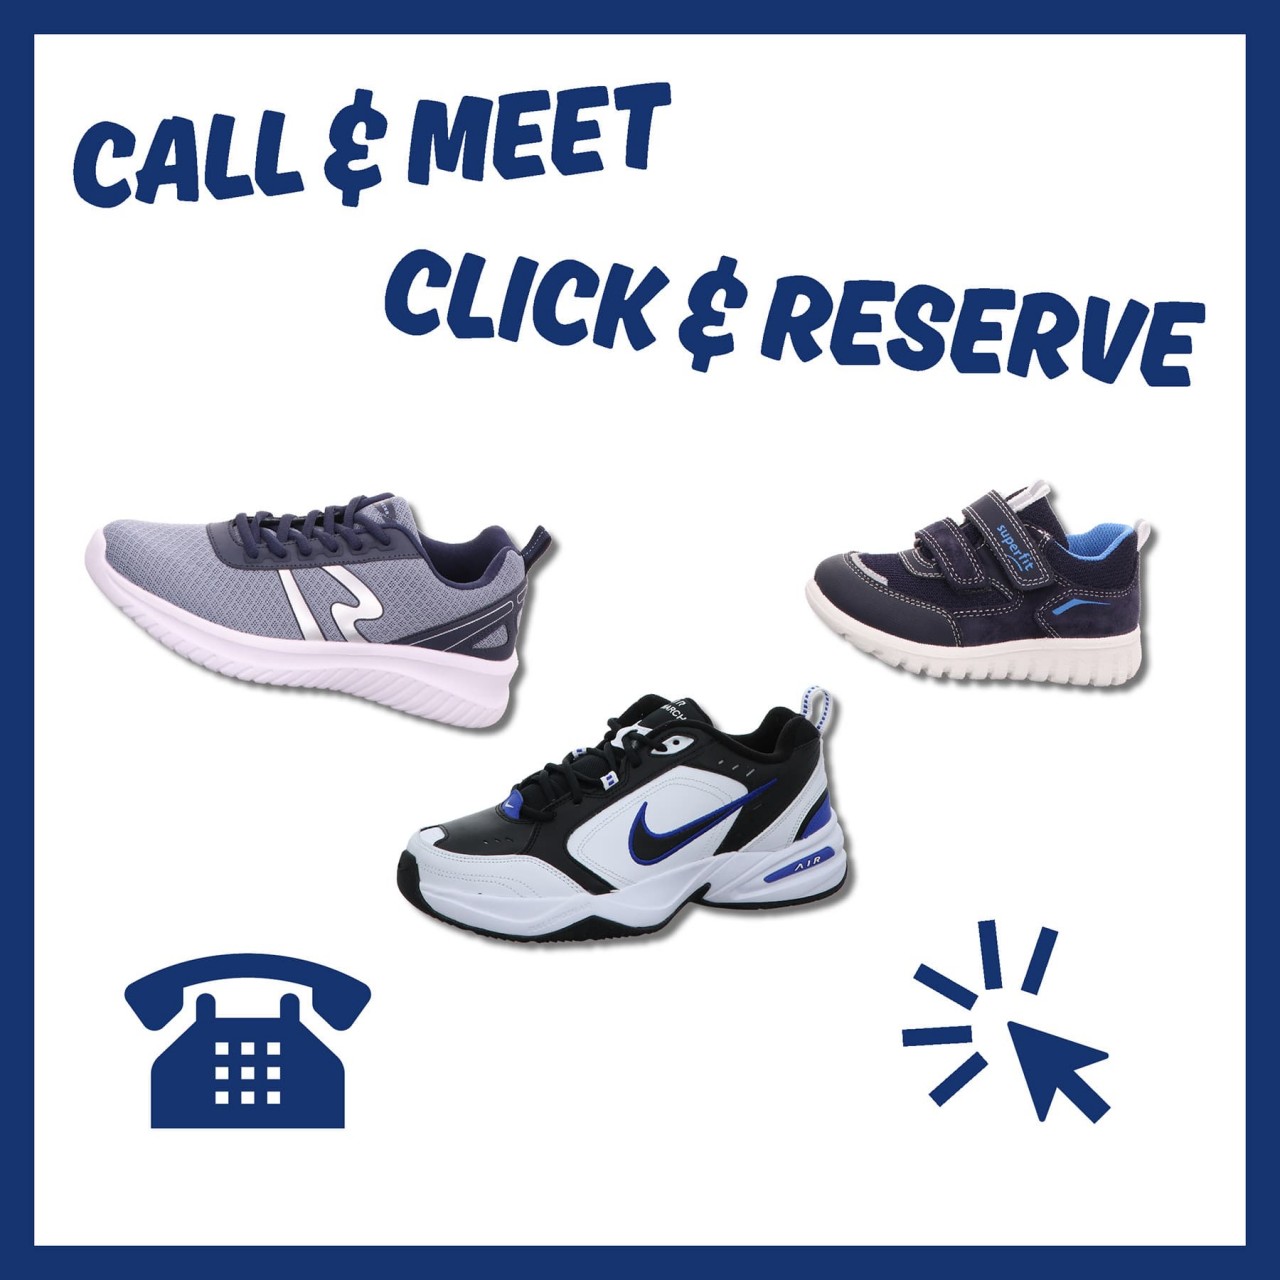 click-and-reserve-call-and-meet